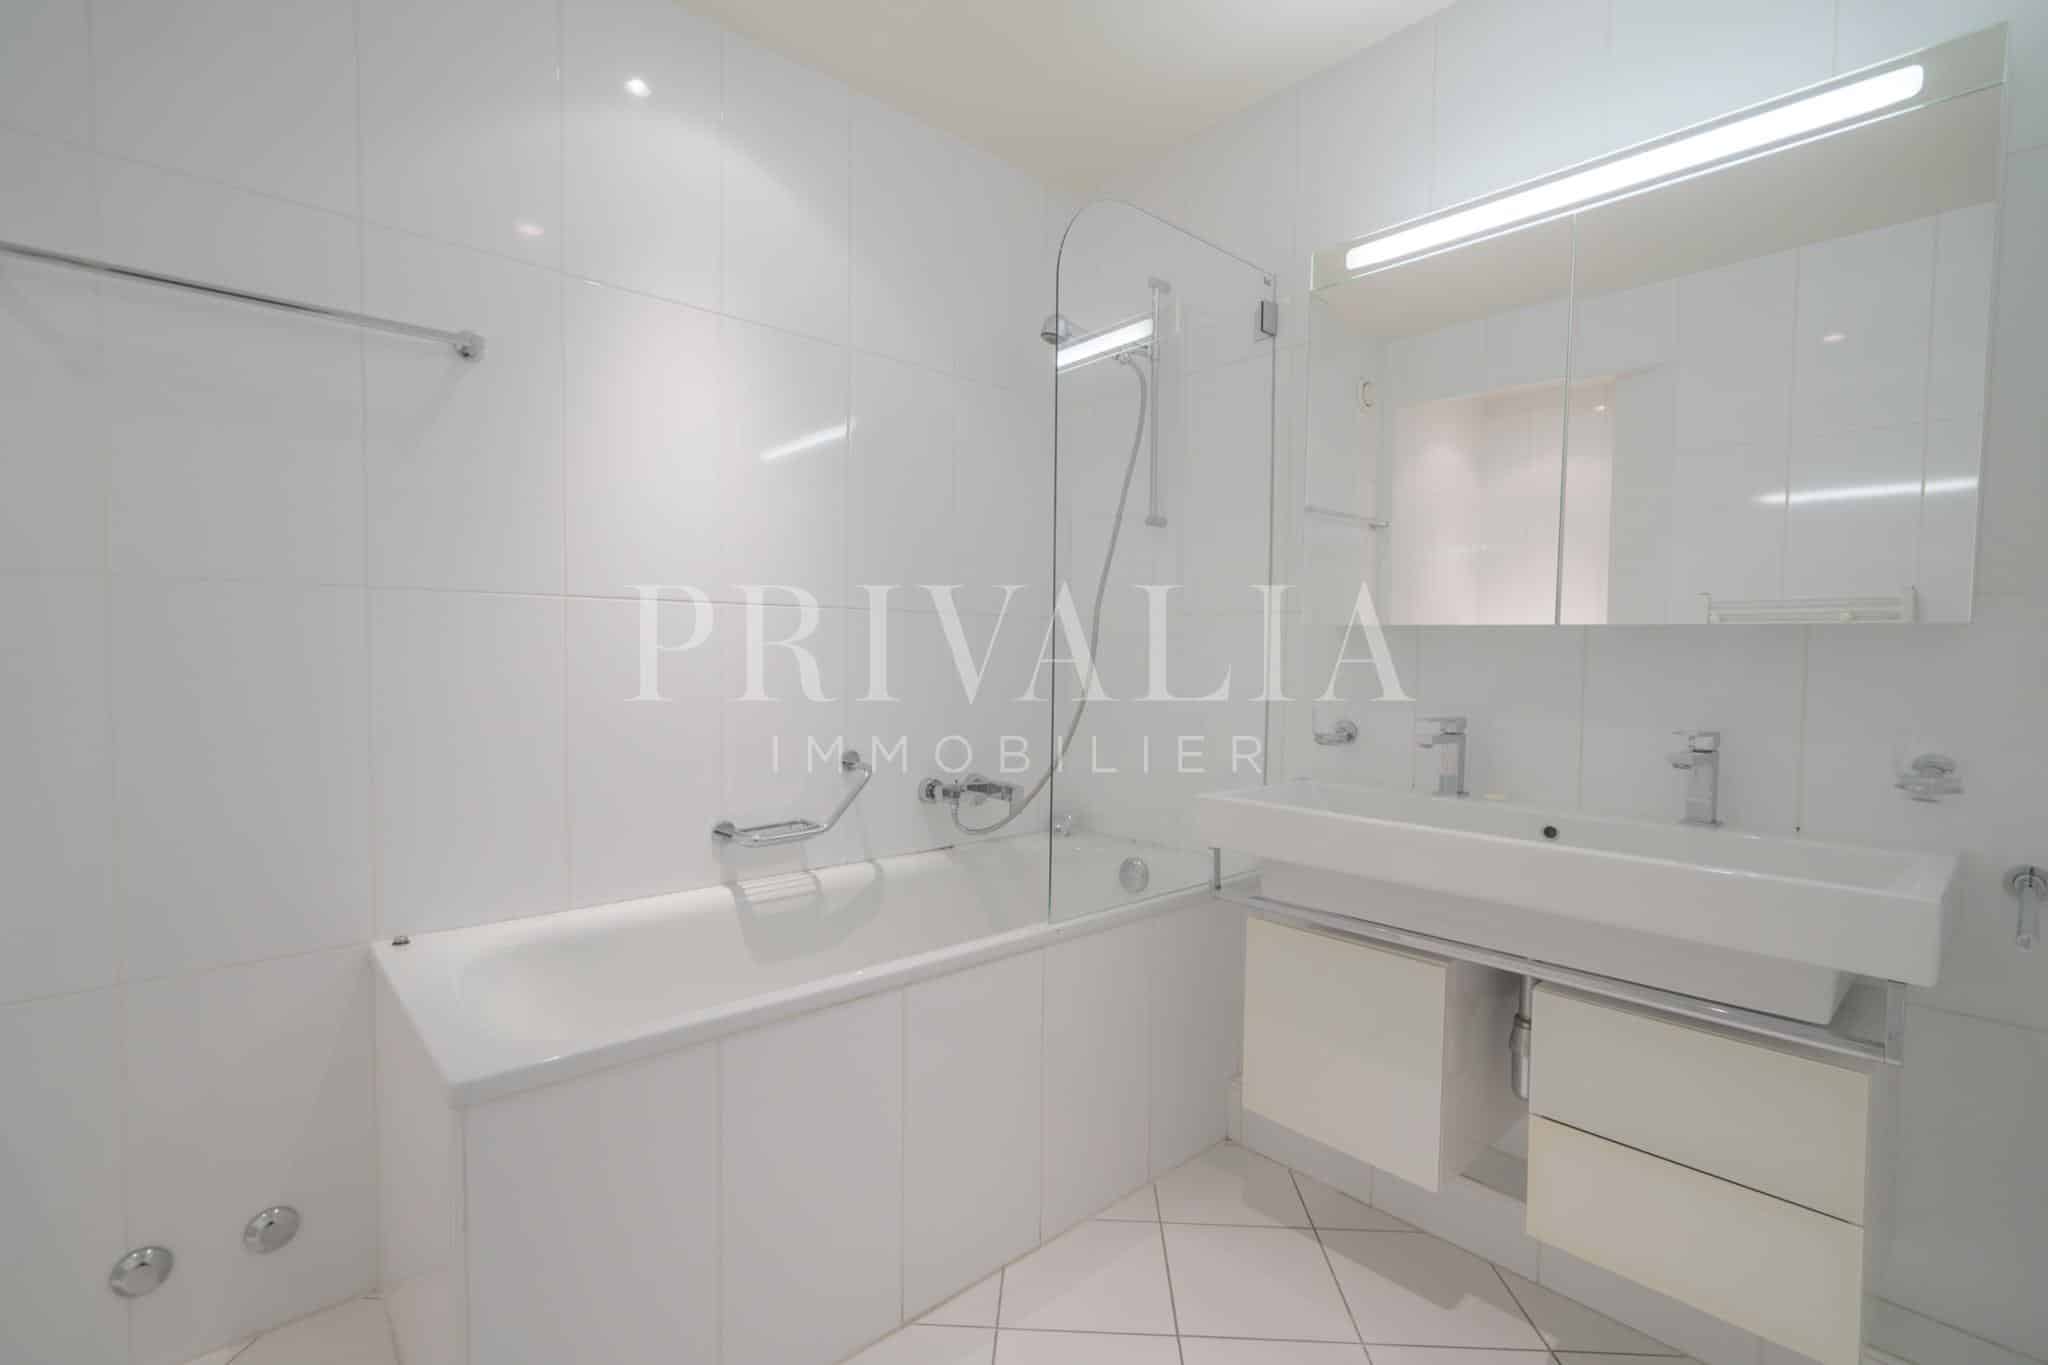 PrivaliaLuxury through-apartment in the immediate vicinity of the International Organizations